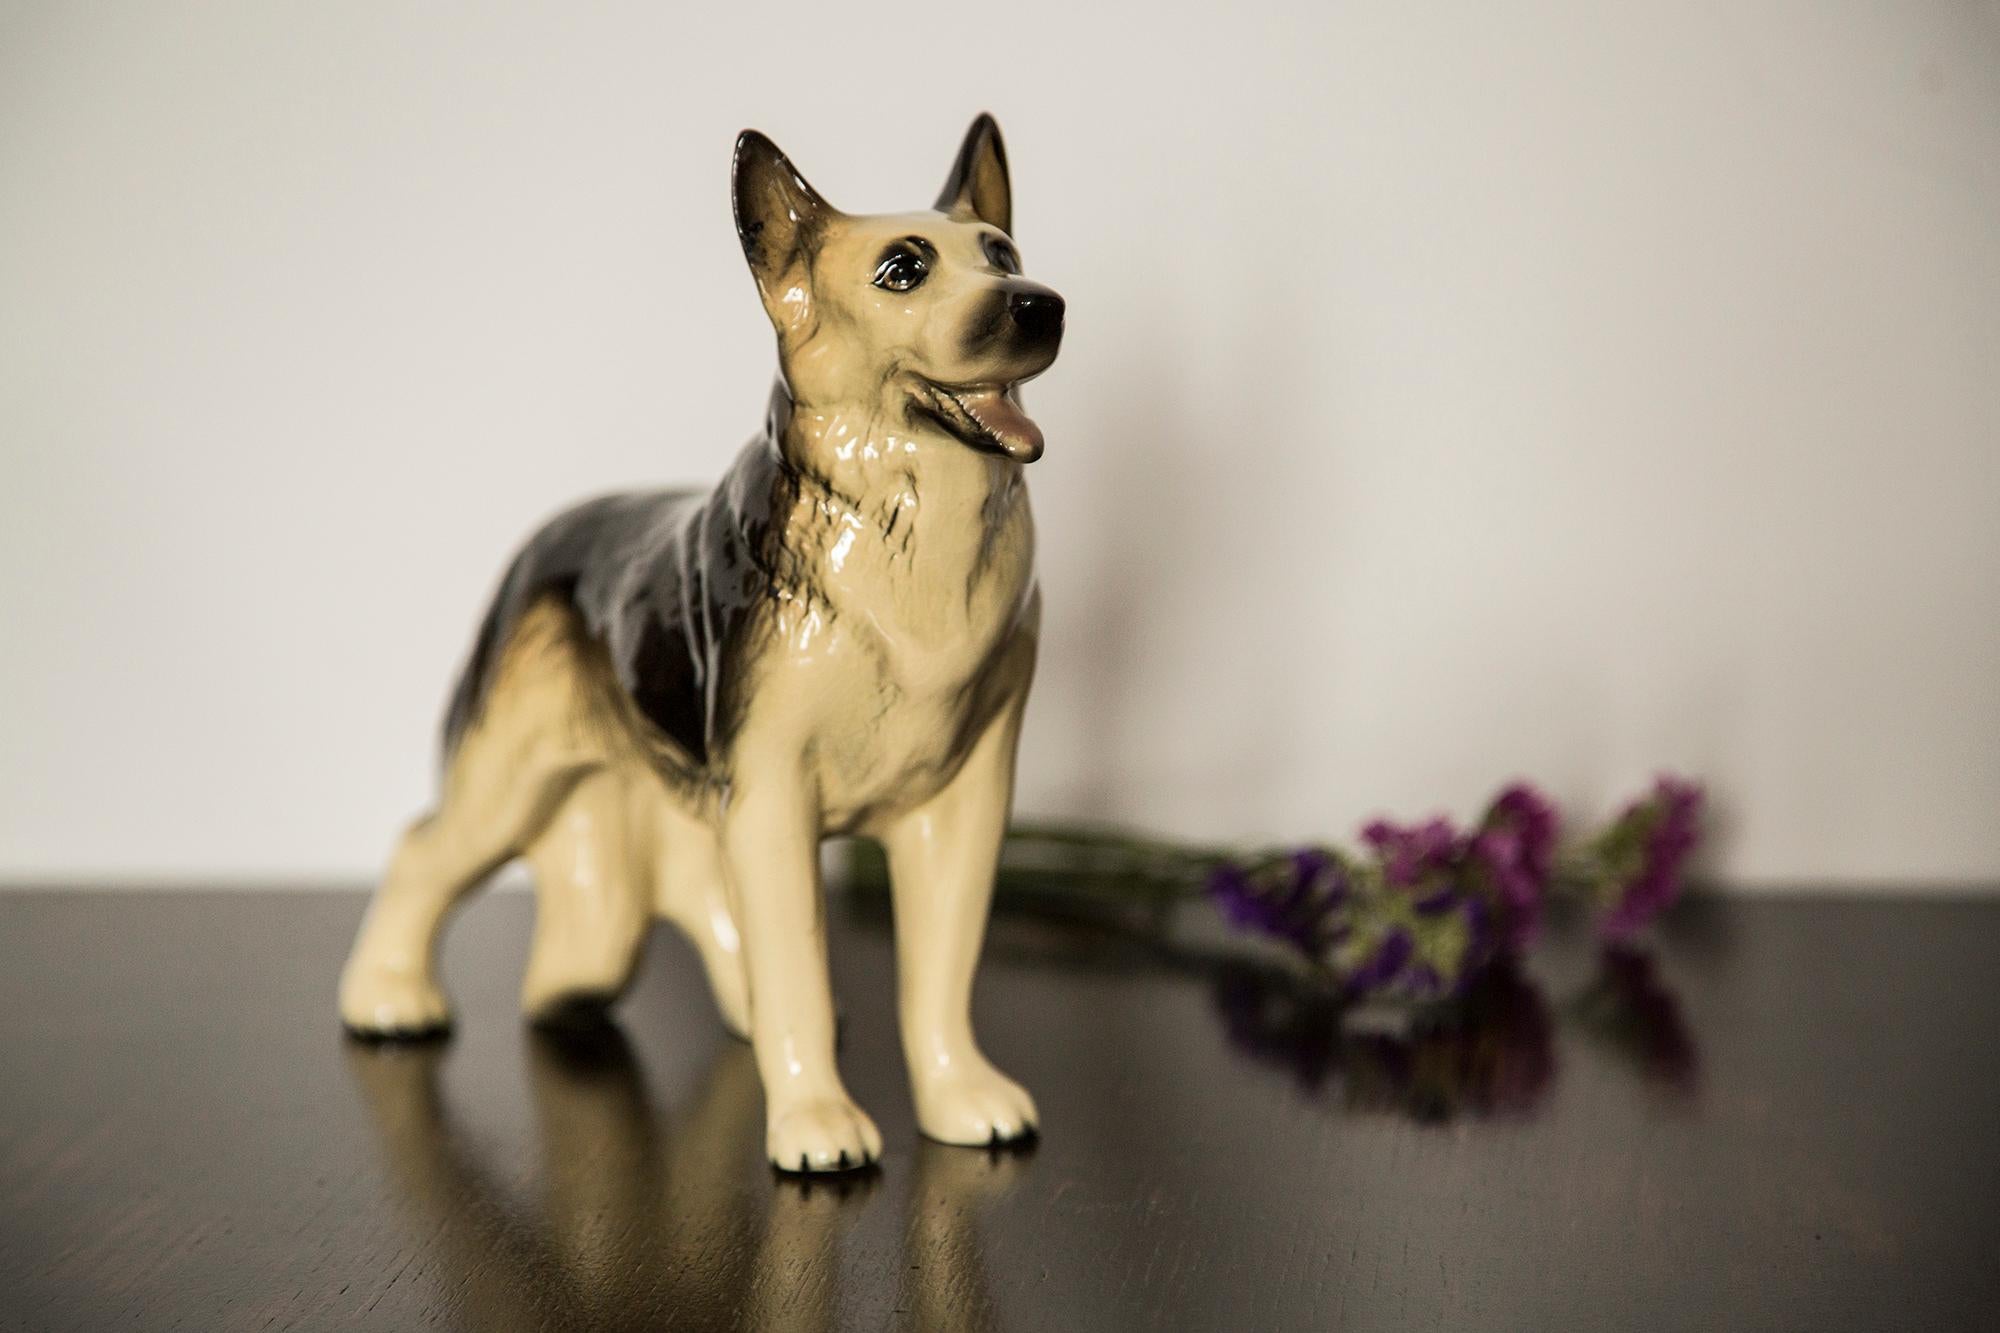 Painted ceramic, very good original vintage condition. No damages or cracks. Beautiful and unique decorative sculpture. German Shepherd Dog Sculpture was produced in England. Only one dog available.